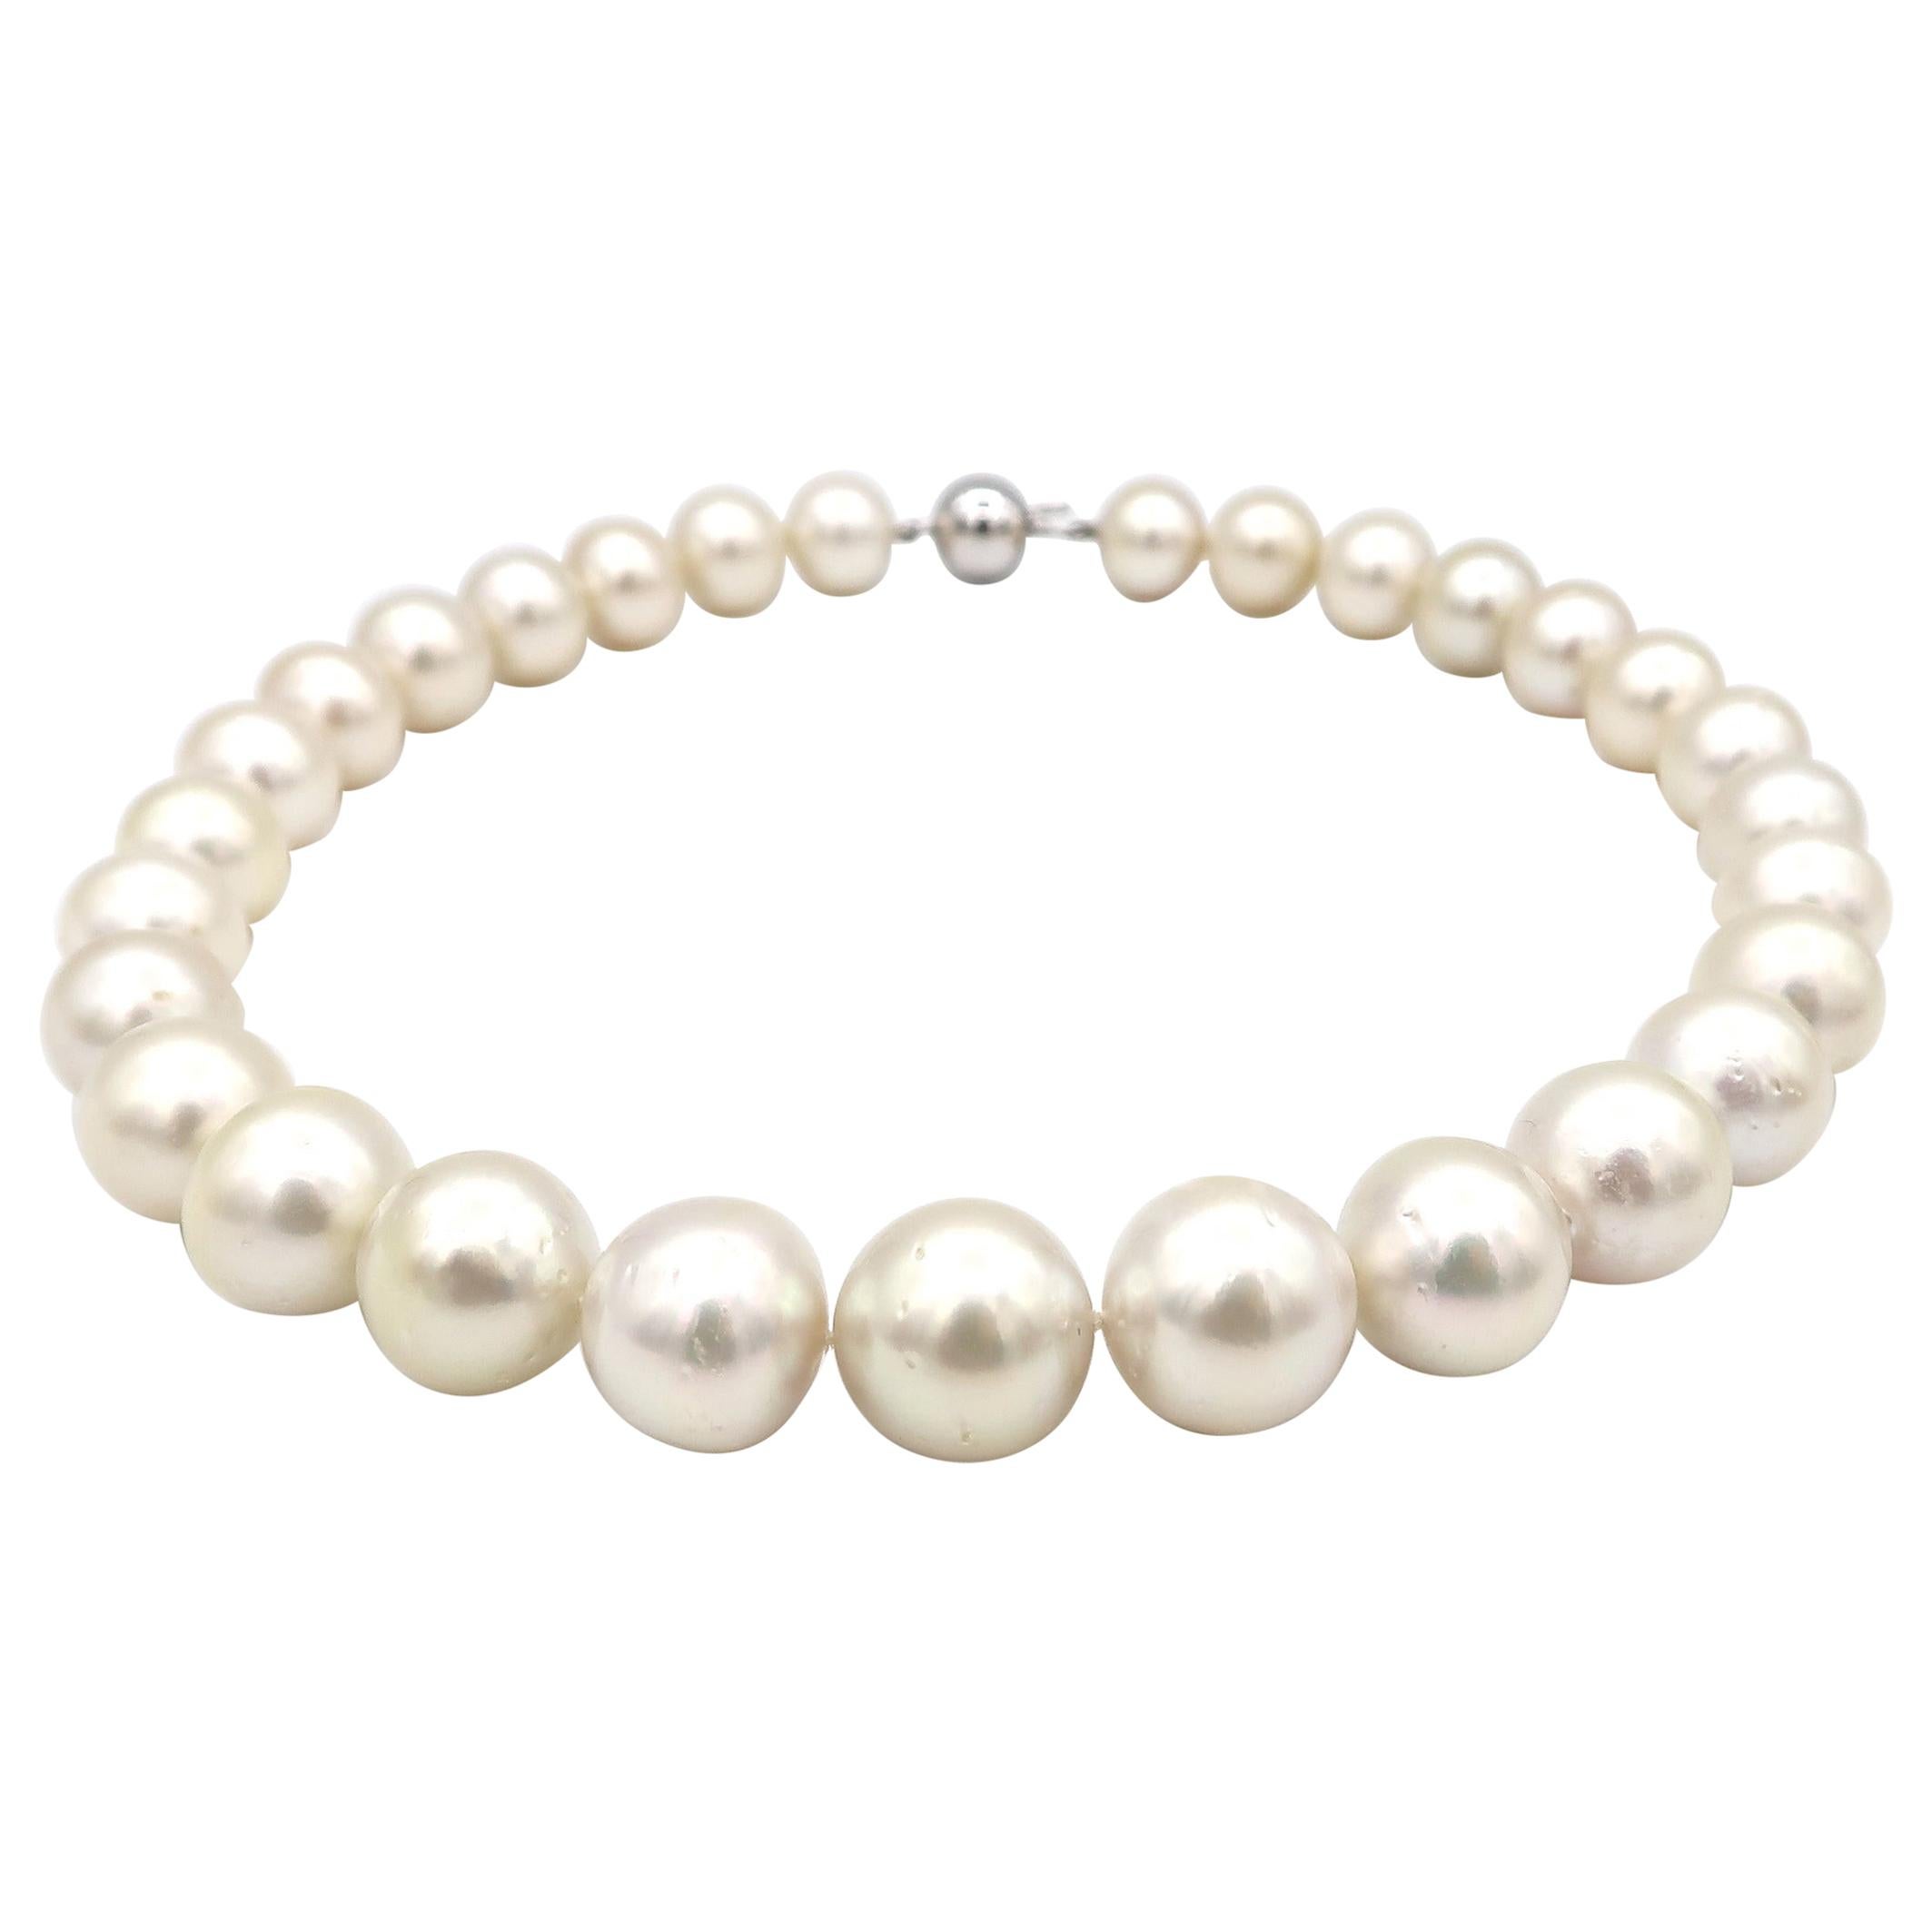 Large Cream South Sea Pearl Necklace For Sale